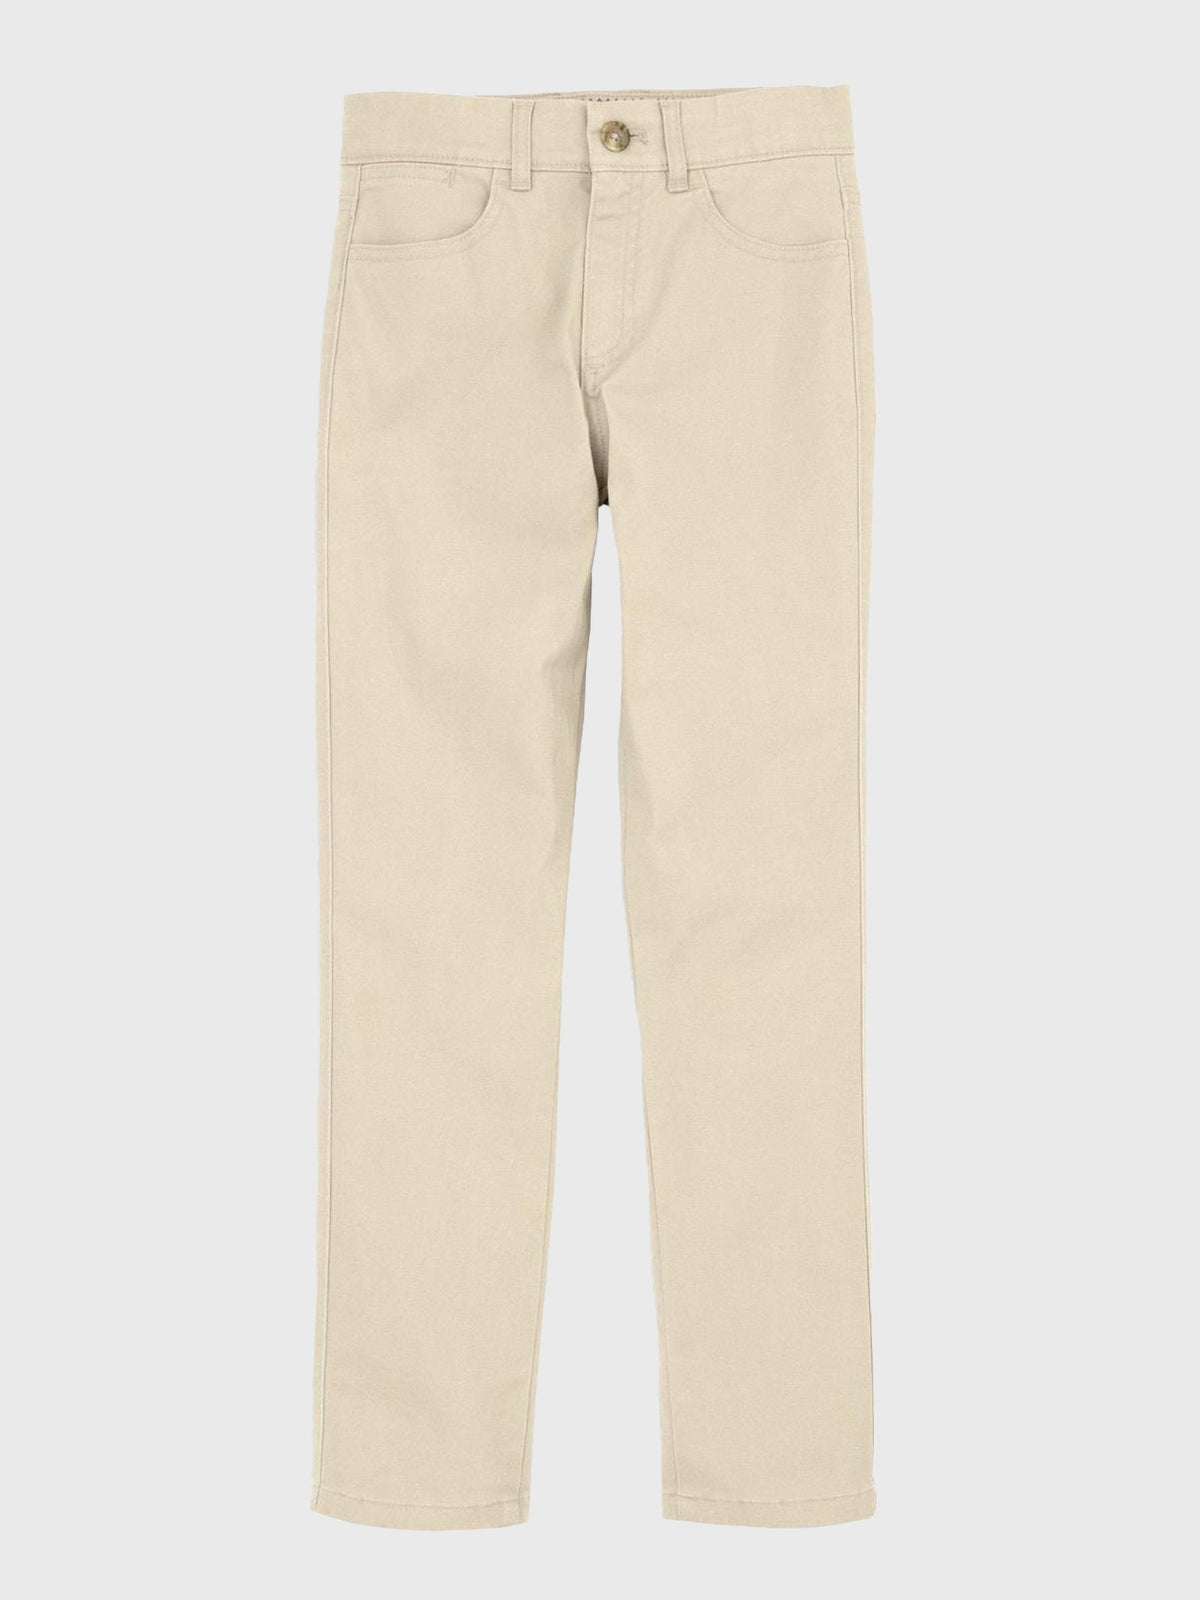 Johnnie O Parsons Youth Pant